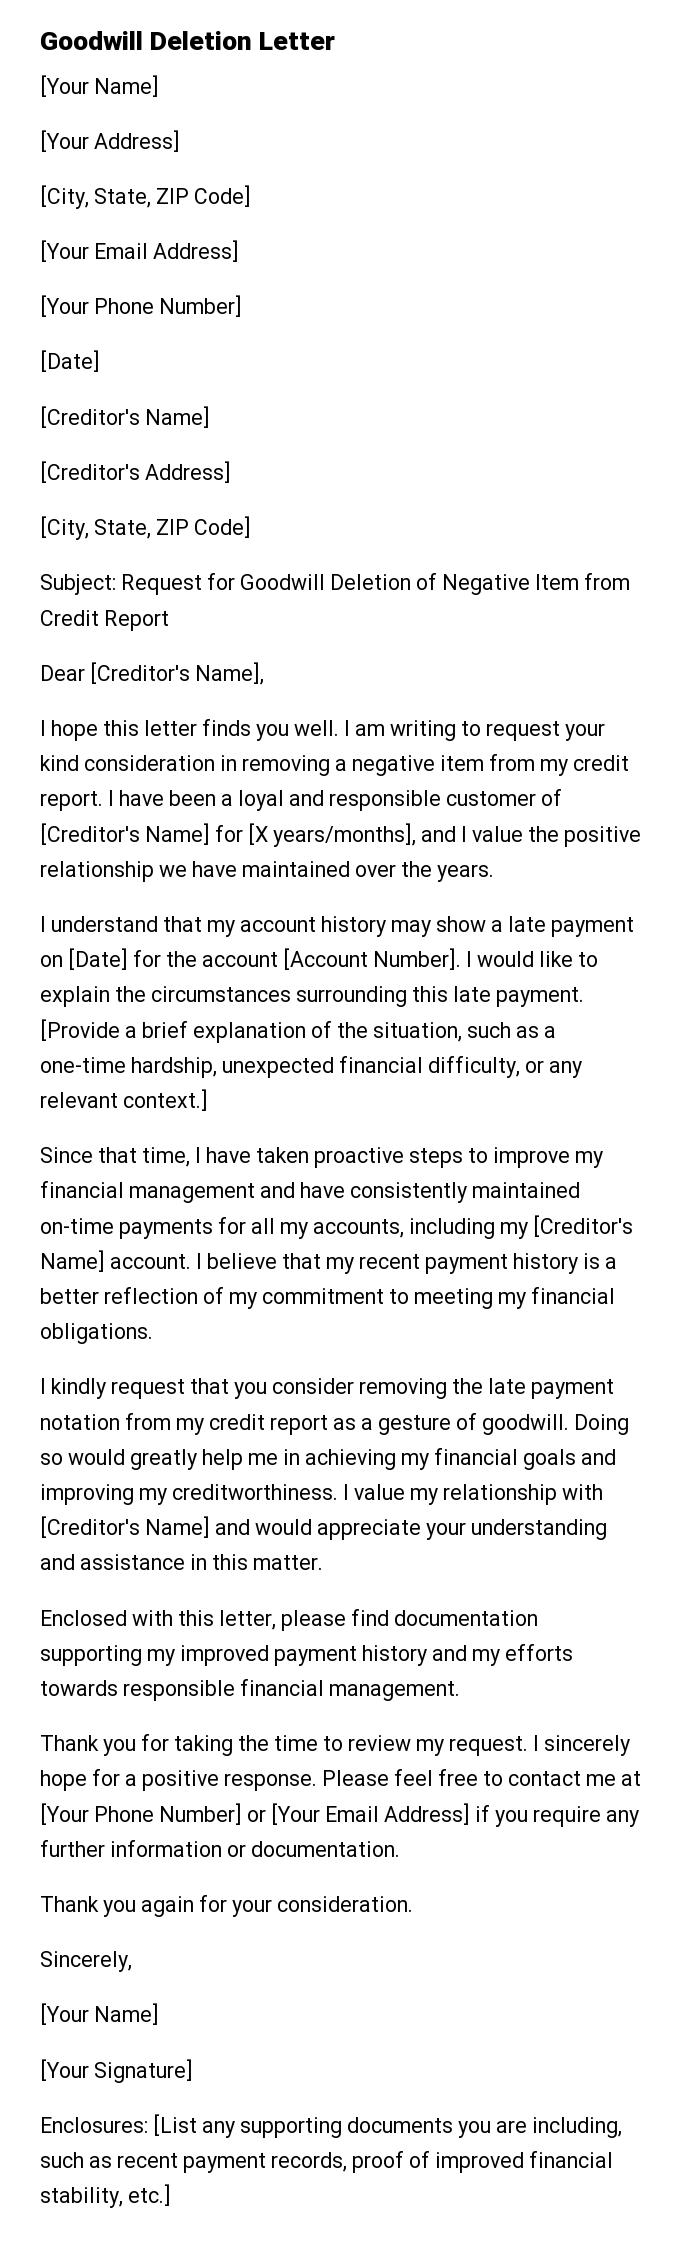 Goodwill Deletion Letter